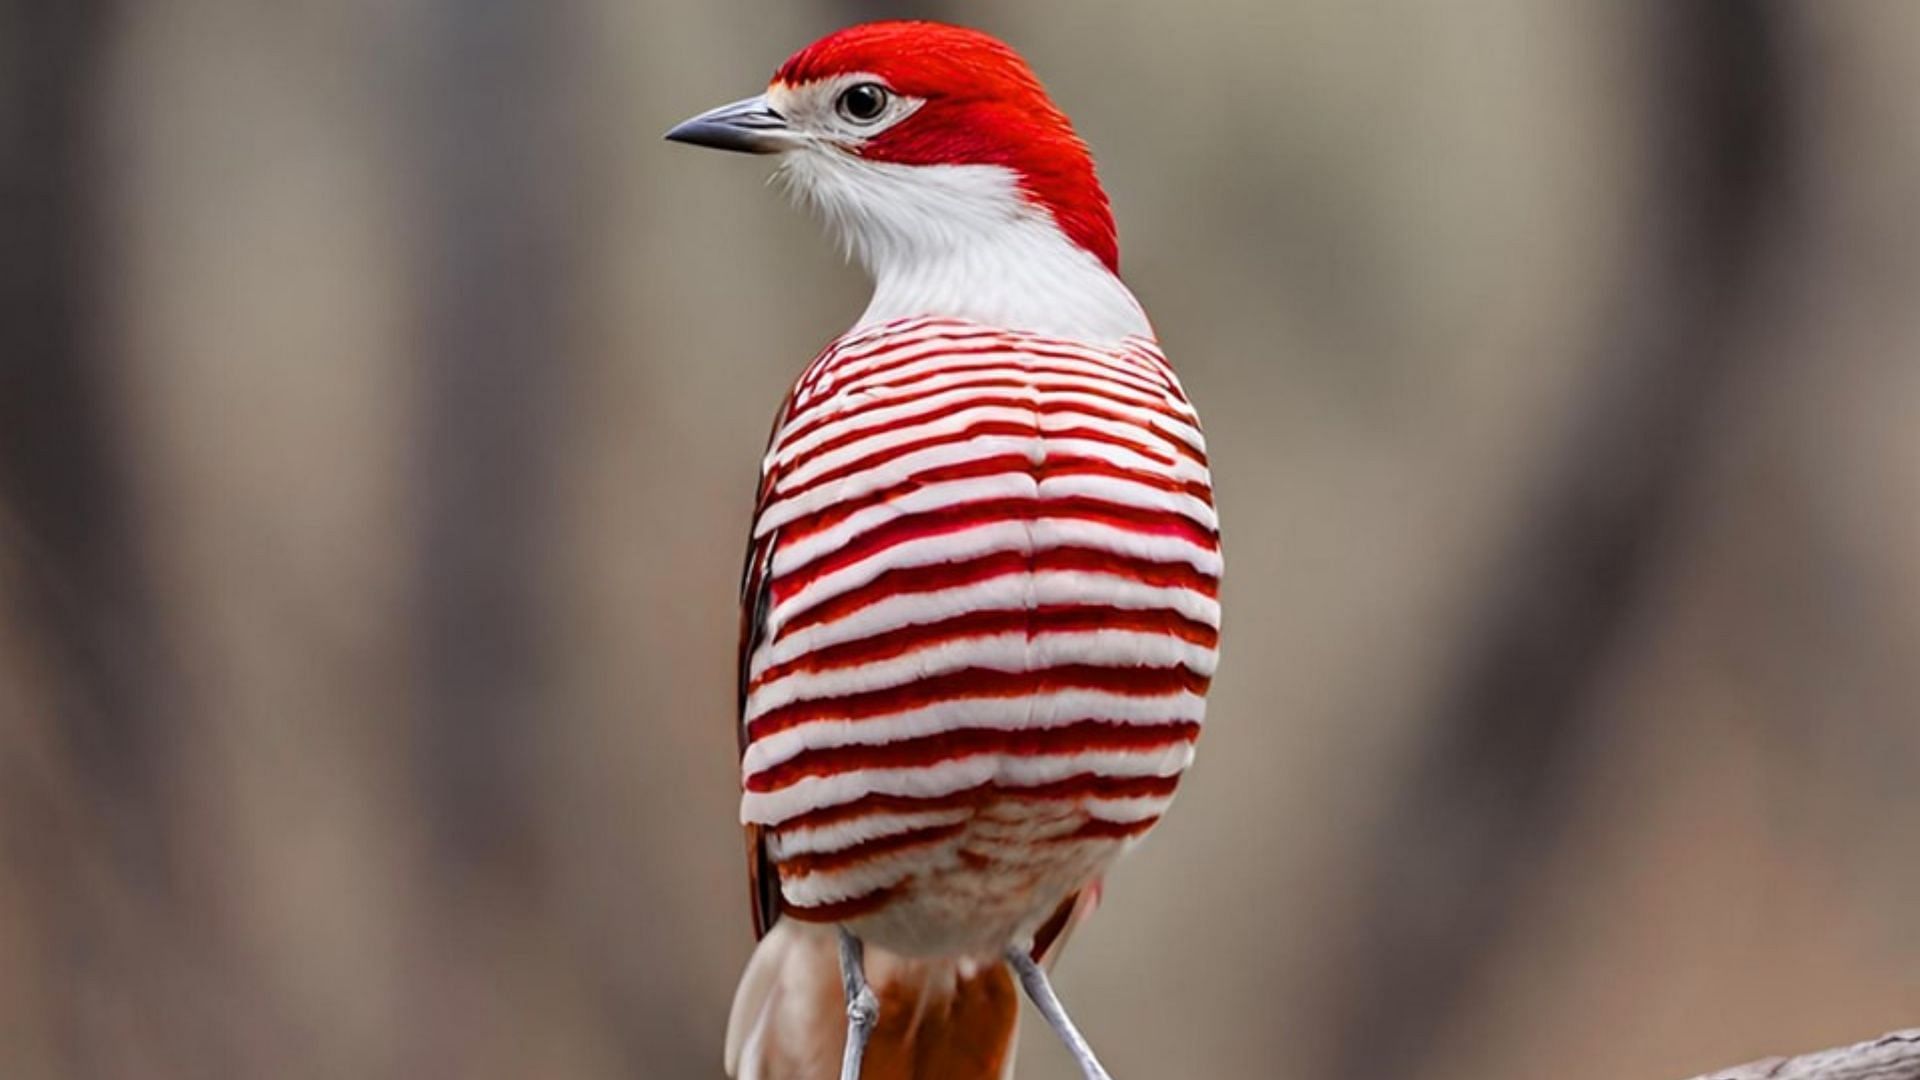 The viral red-and-white Pyjama Bird is not real (Image via X / @flankes838811)